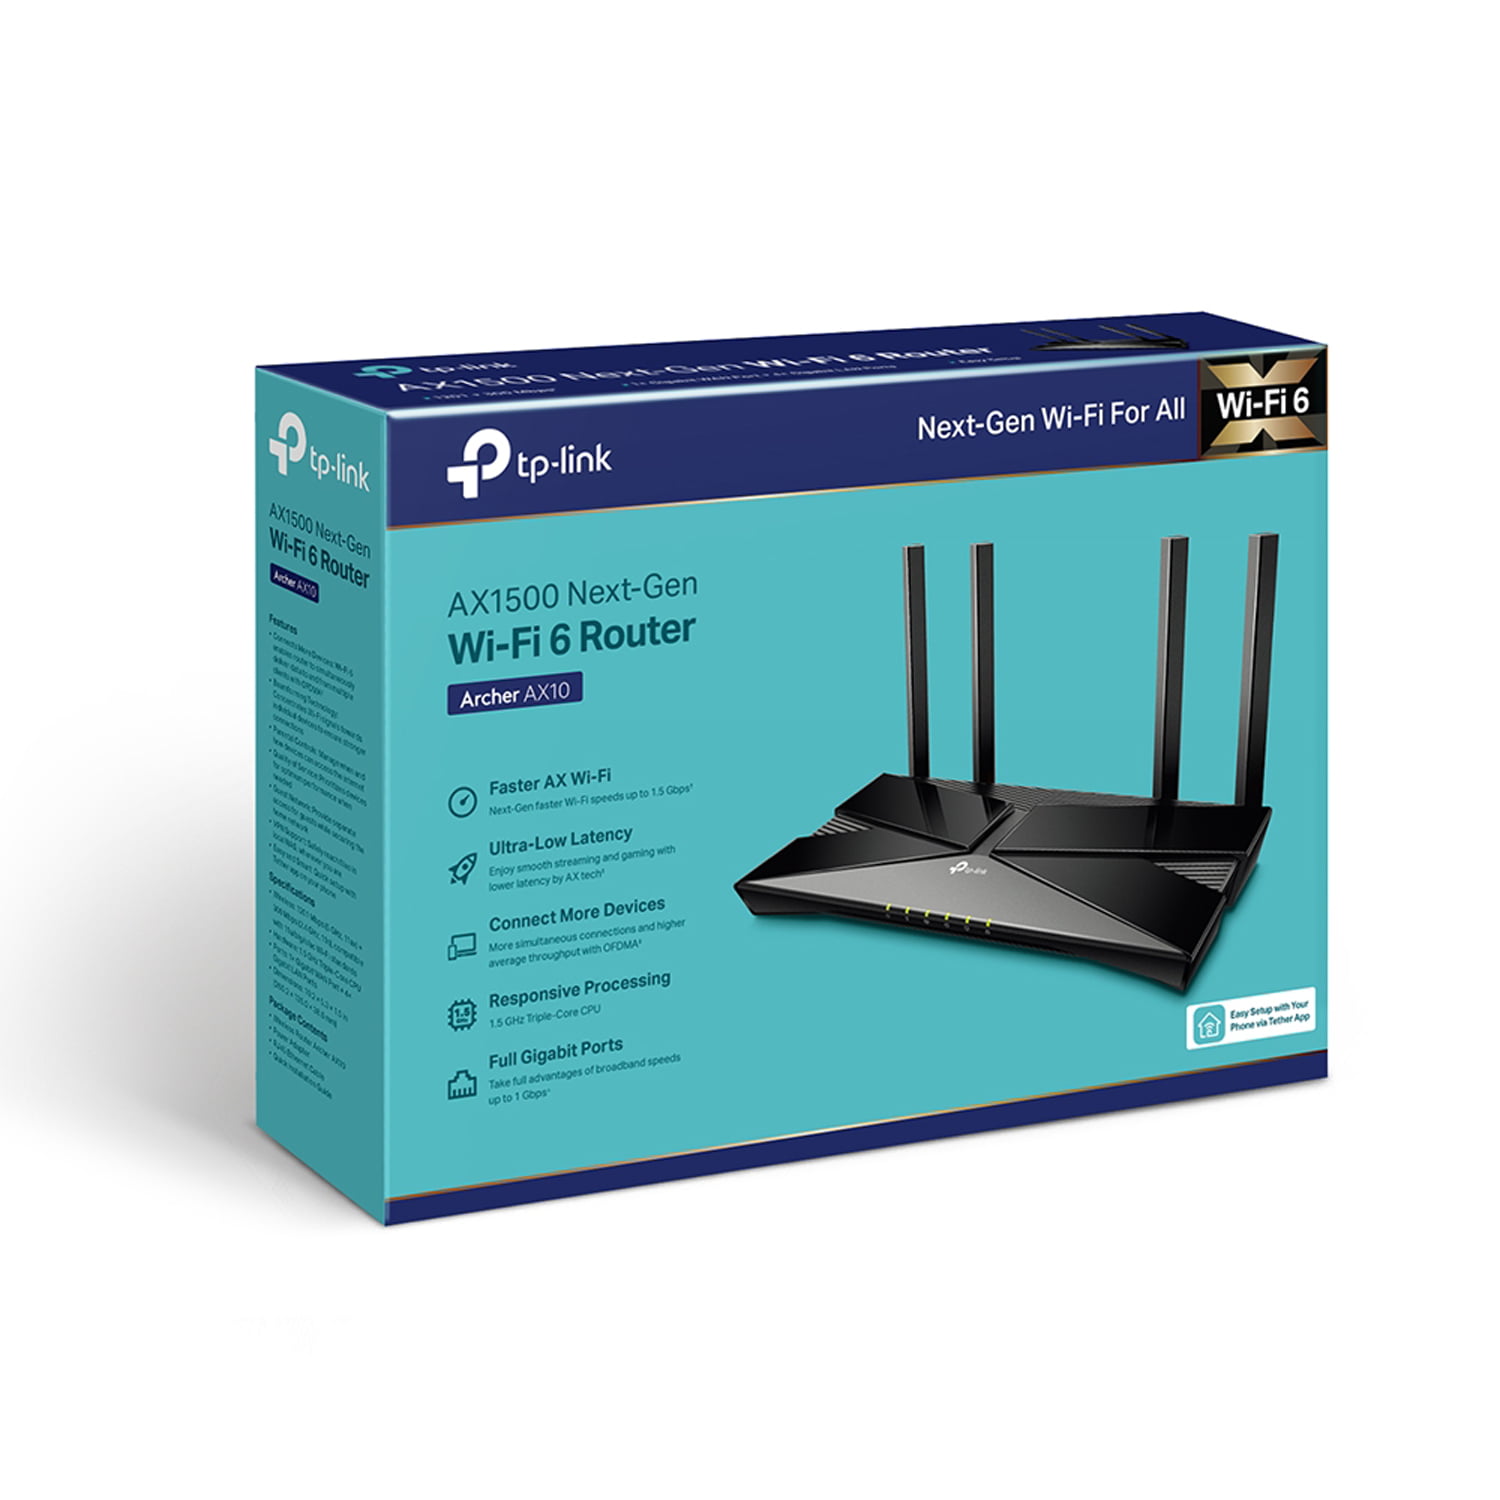 TP-Link Archer AX10 (AX1500) Wi-Fi 6 Router Review